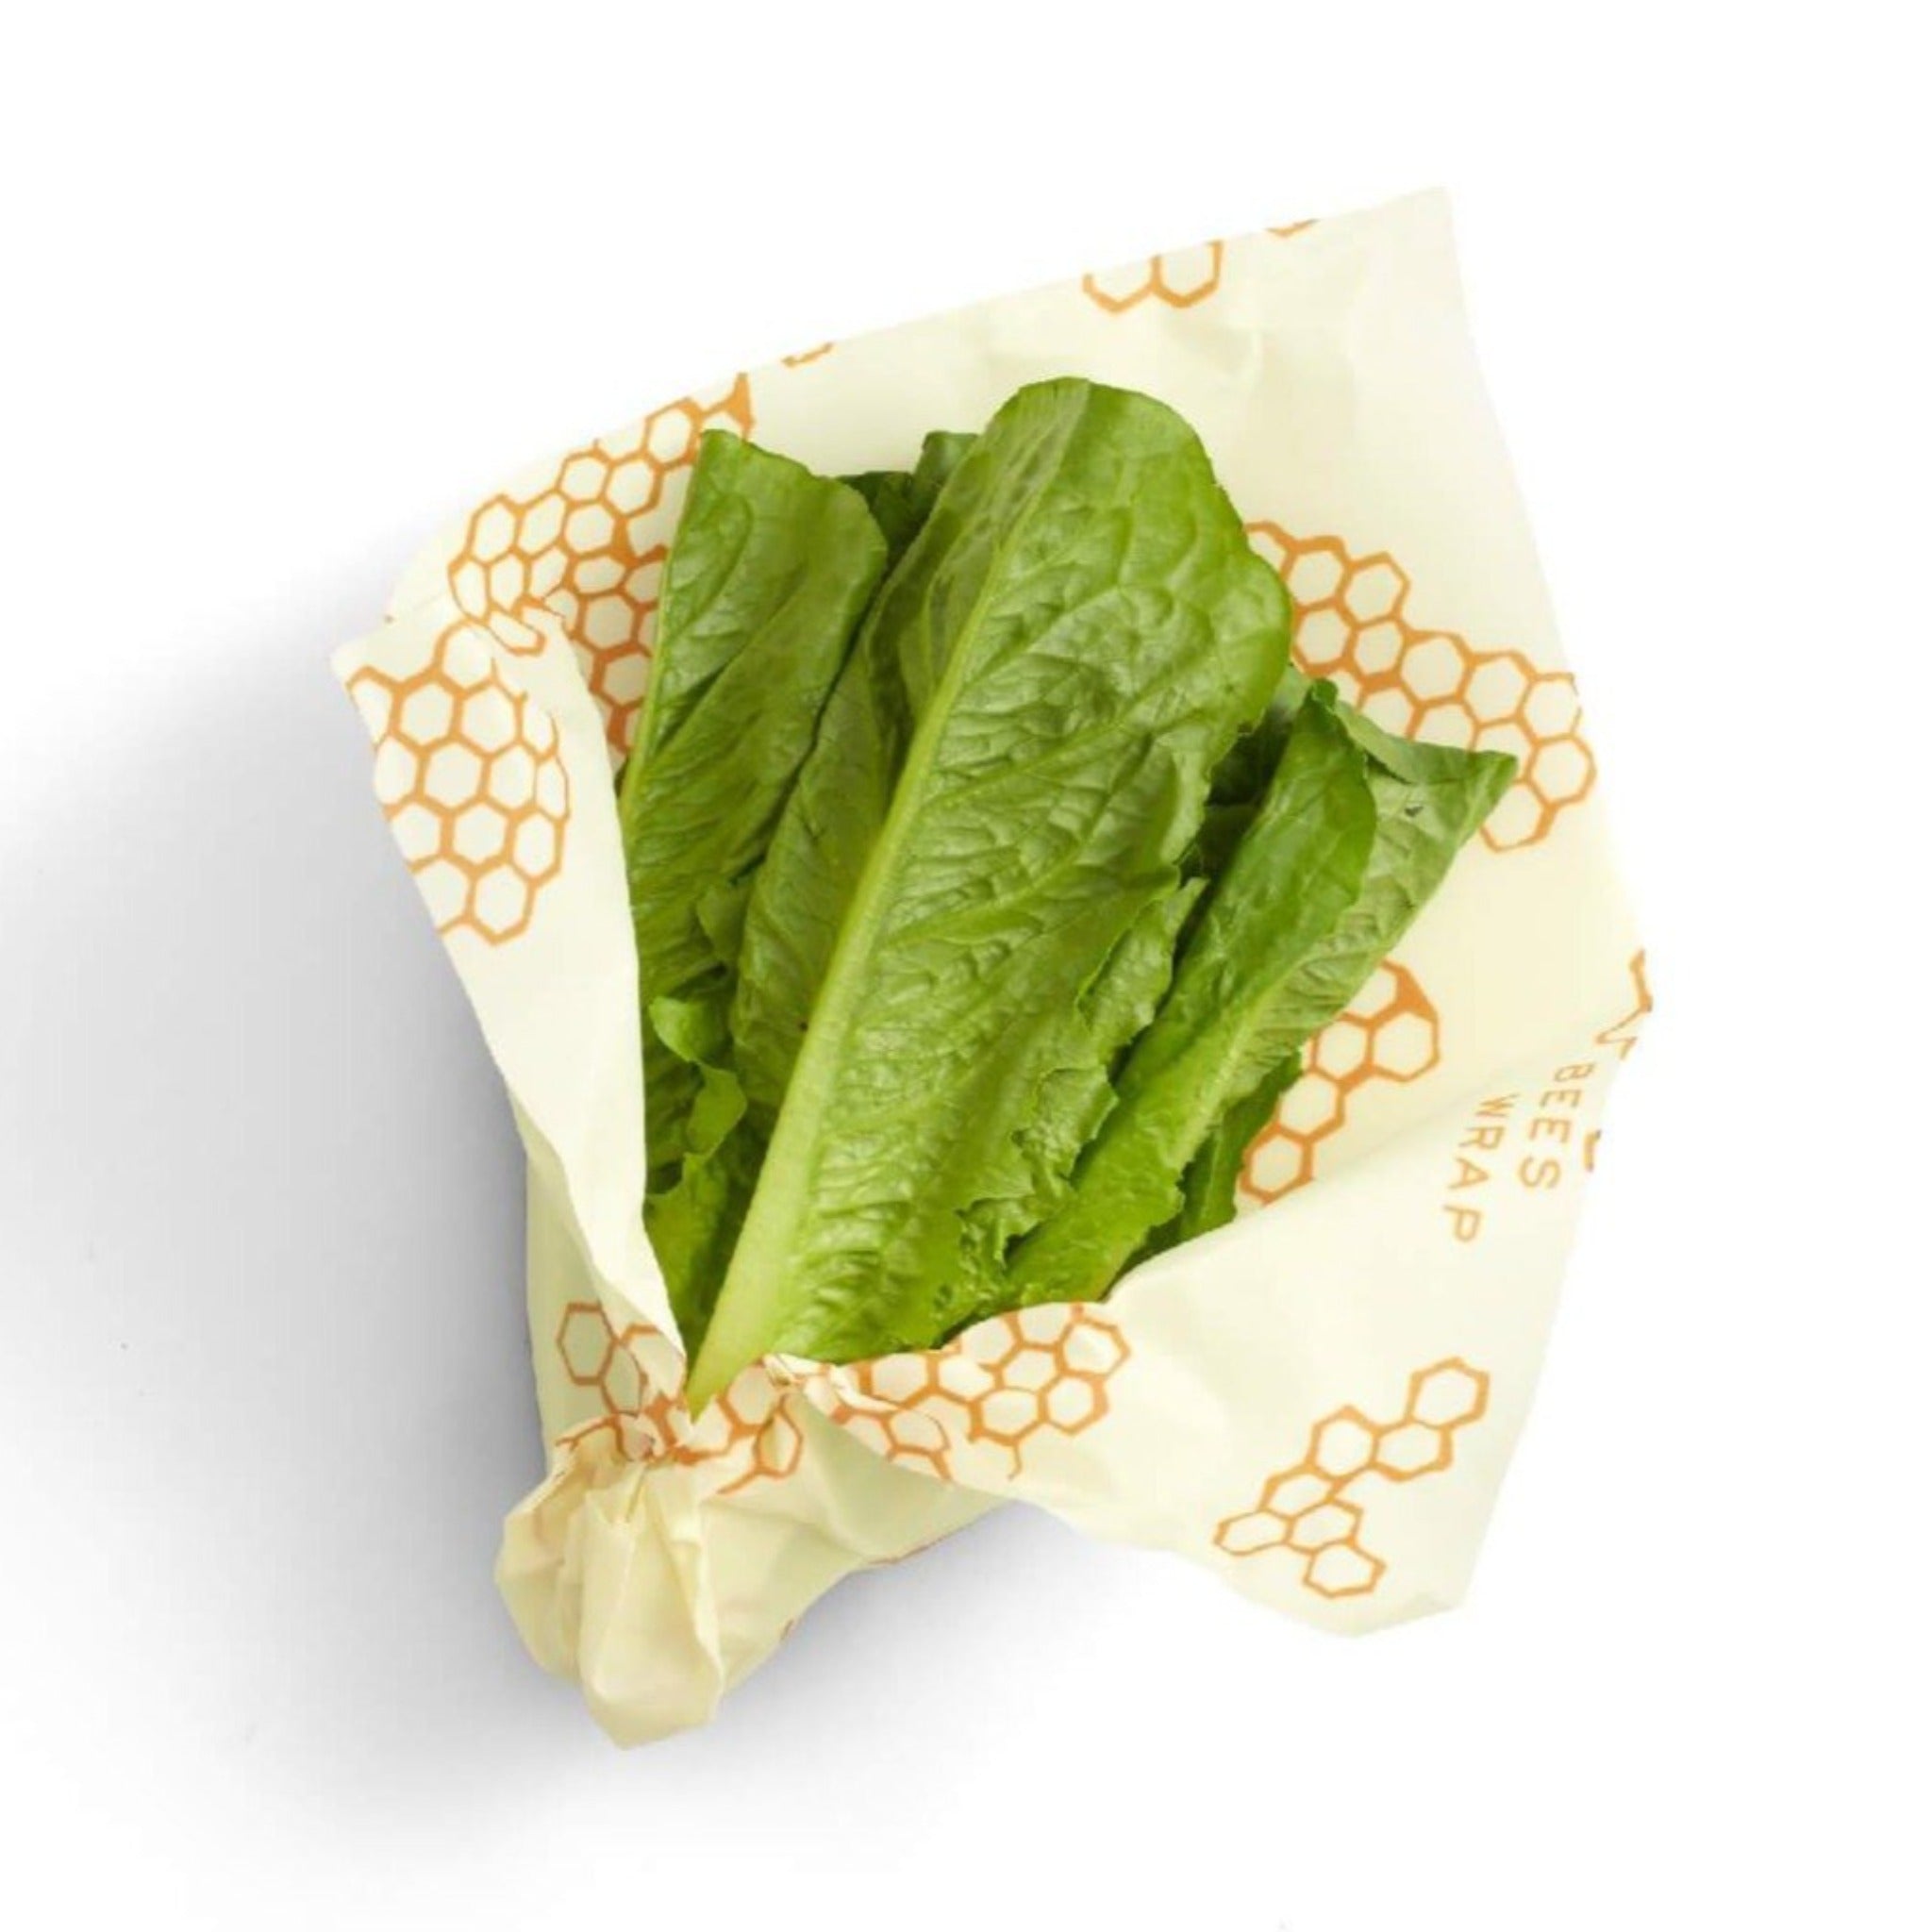 beeswax wrap in use overing lettuce vegetable